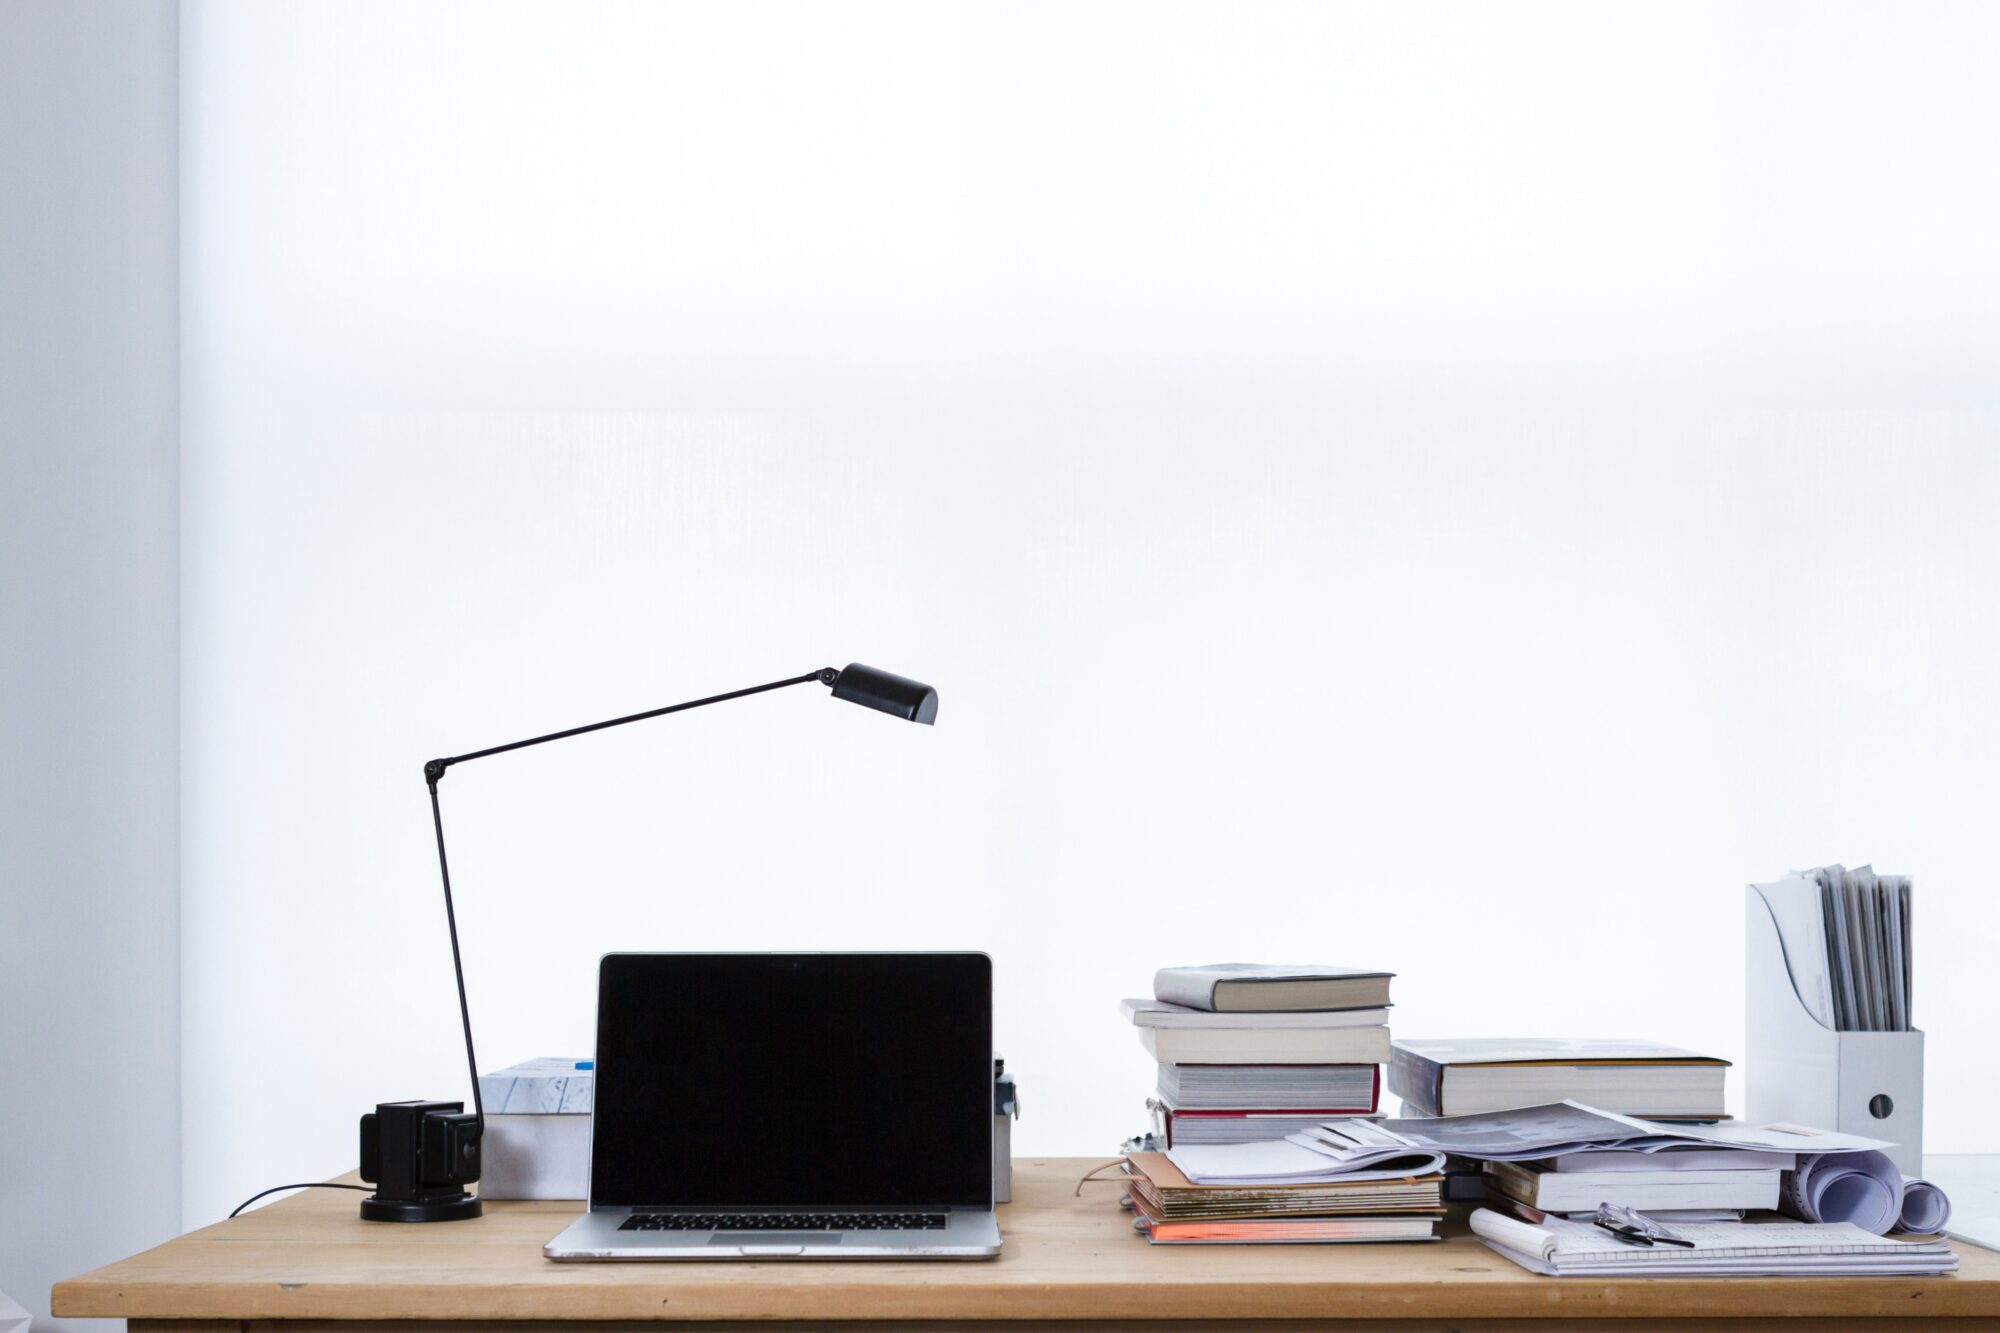 Desk with lamp, books and laptop